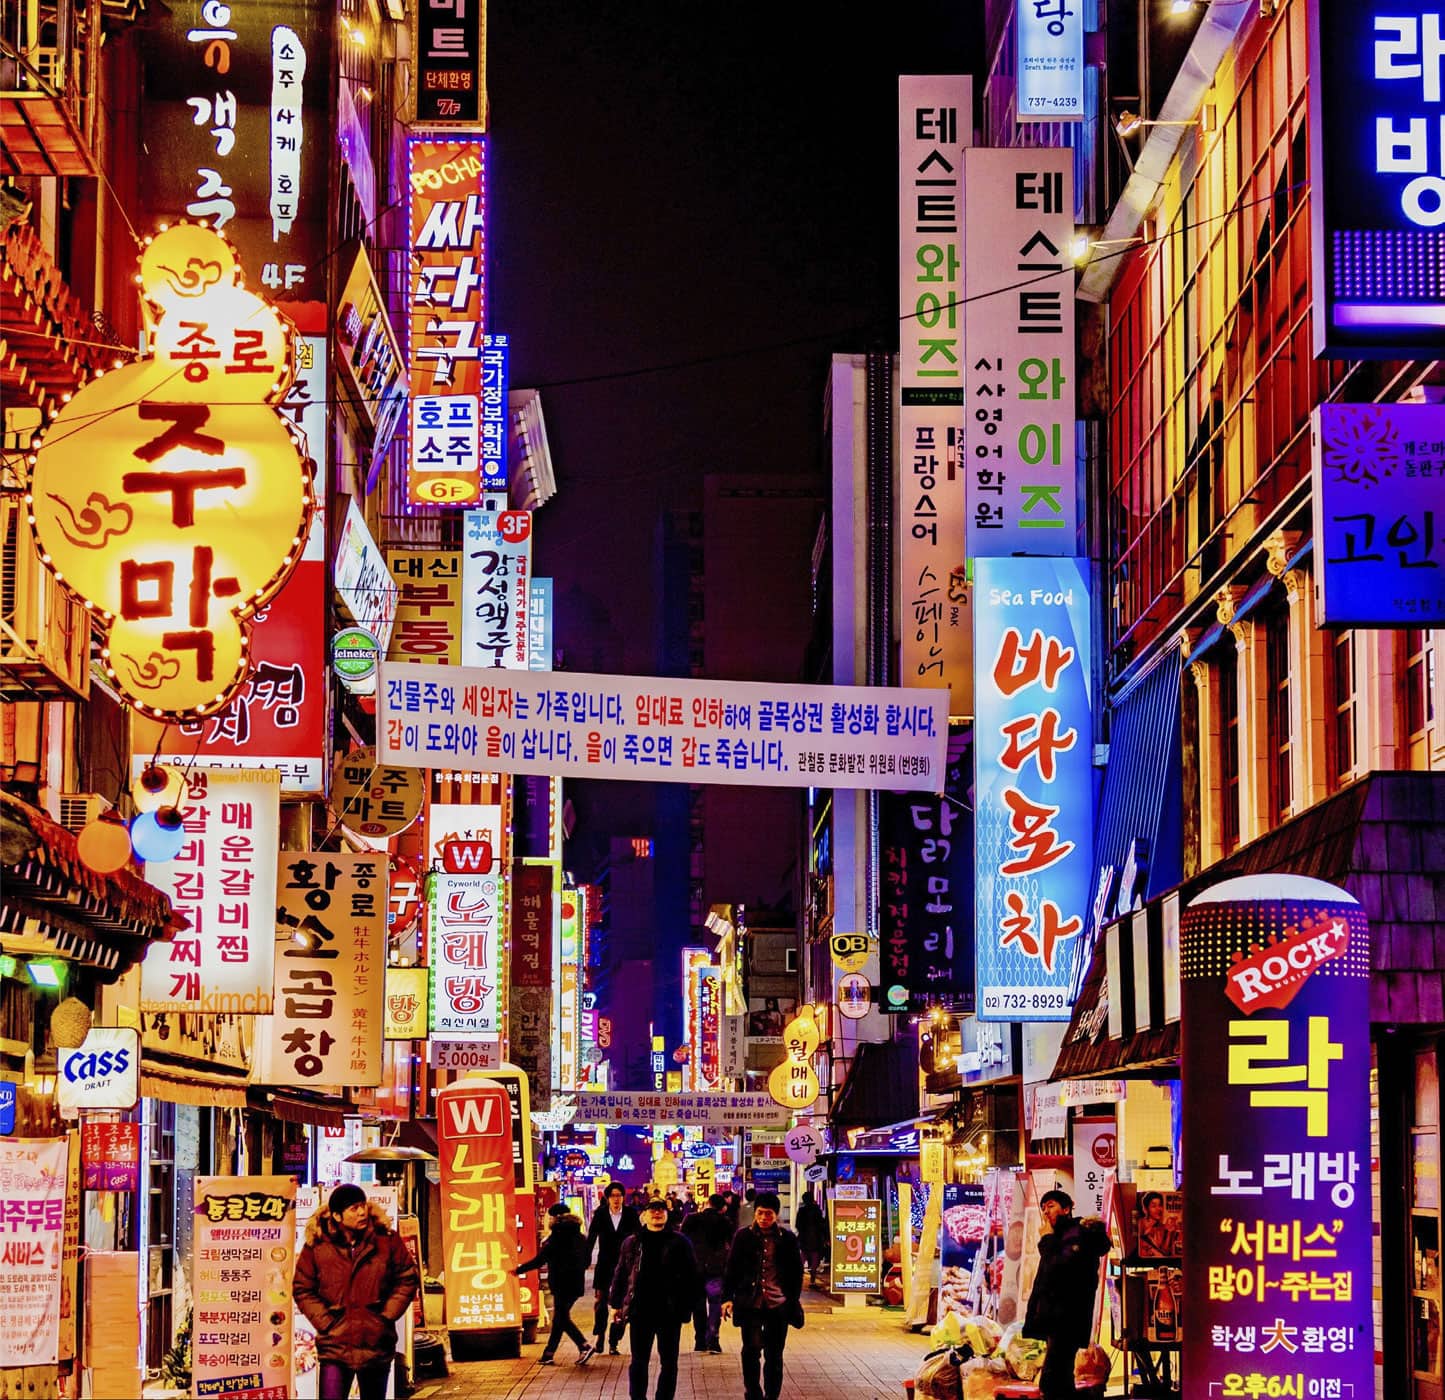 Illuminated buildings at nighttime in Seoul I will also explain the character - photo 5